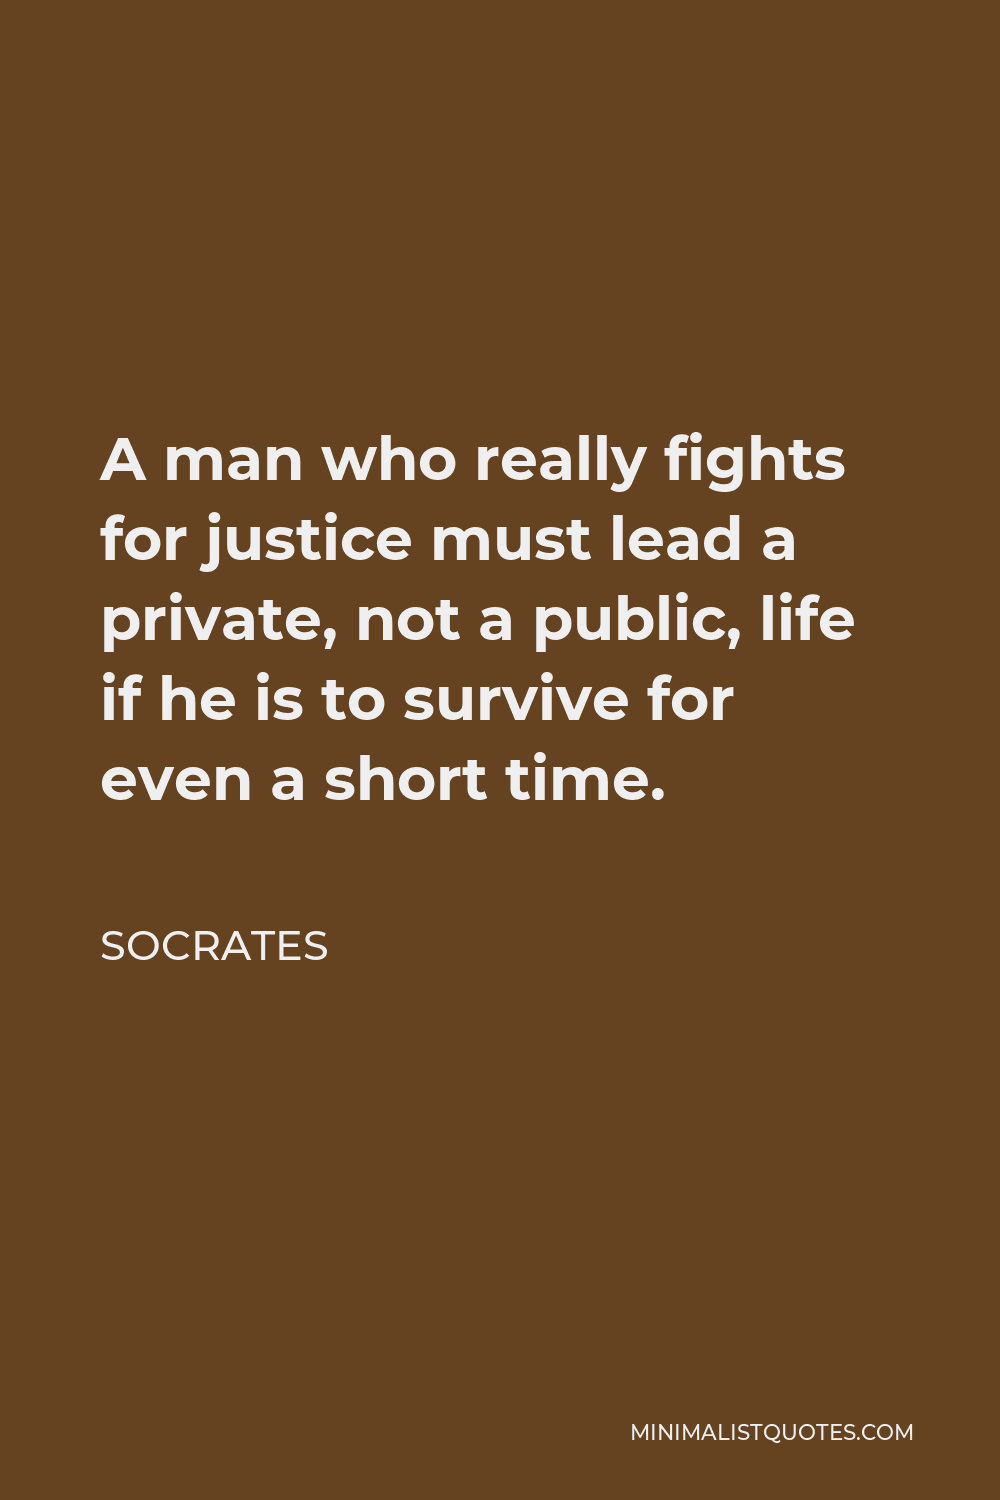 Socrates Quote - A man who really fights for justice must lead a private, not a public, life if he is to survive for even a short time.